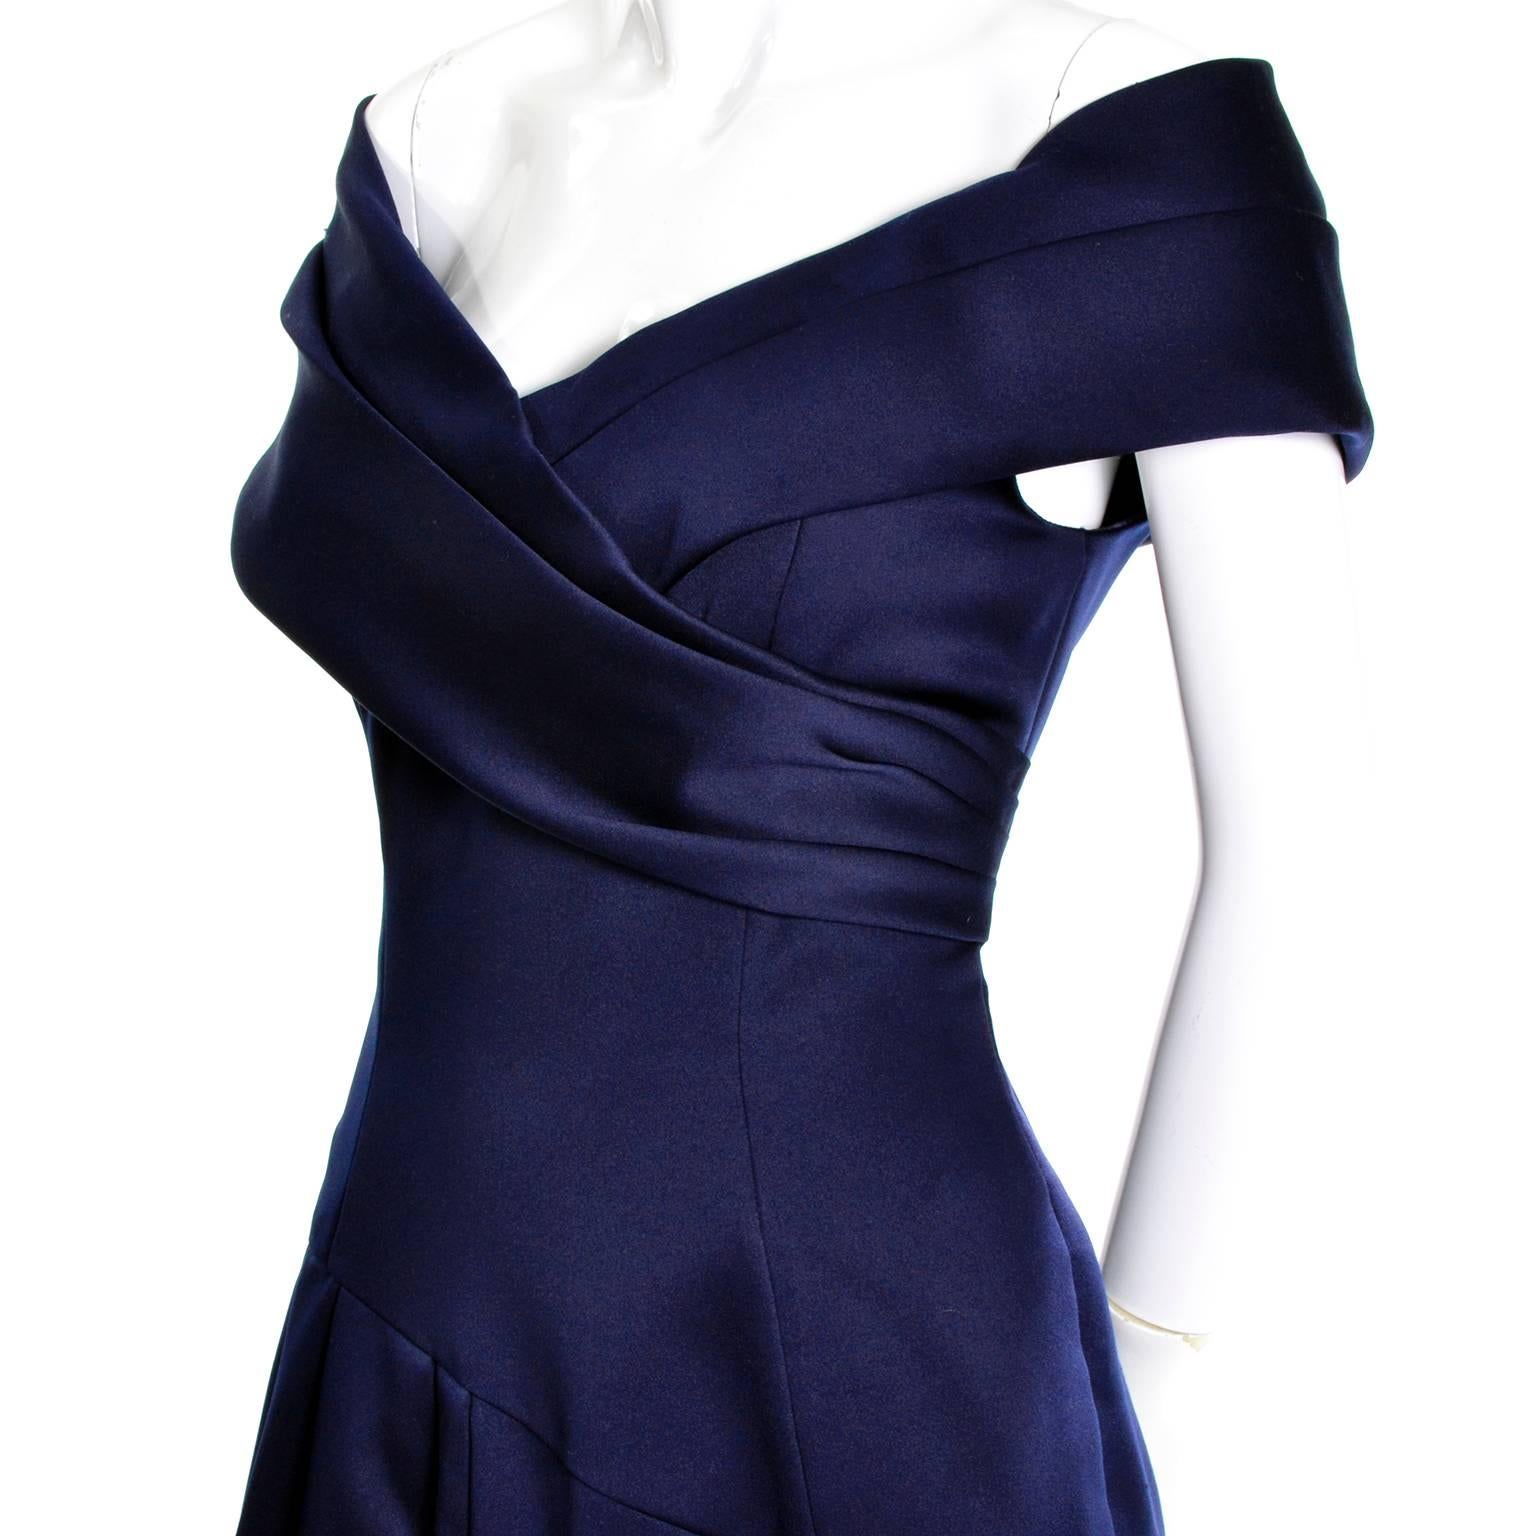 This vintage navy blue evening gown was designed by Victor Costa. The dress is matte satin  in excellent condition and the skirt portion is lined with tulle.  There are optional shoulder straps that we haven't shown or you can wear the dress